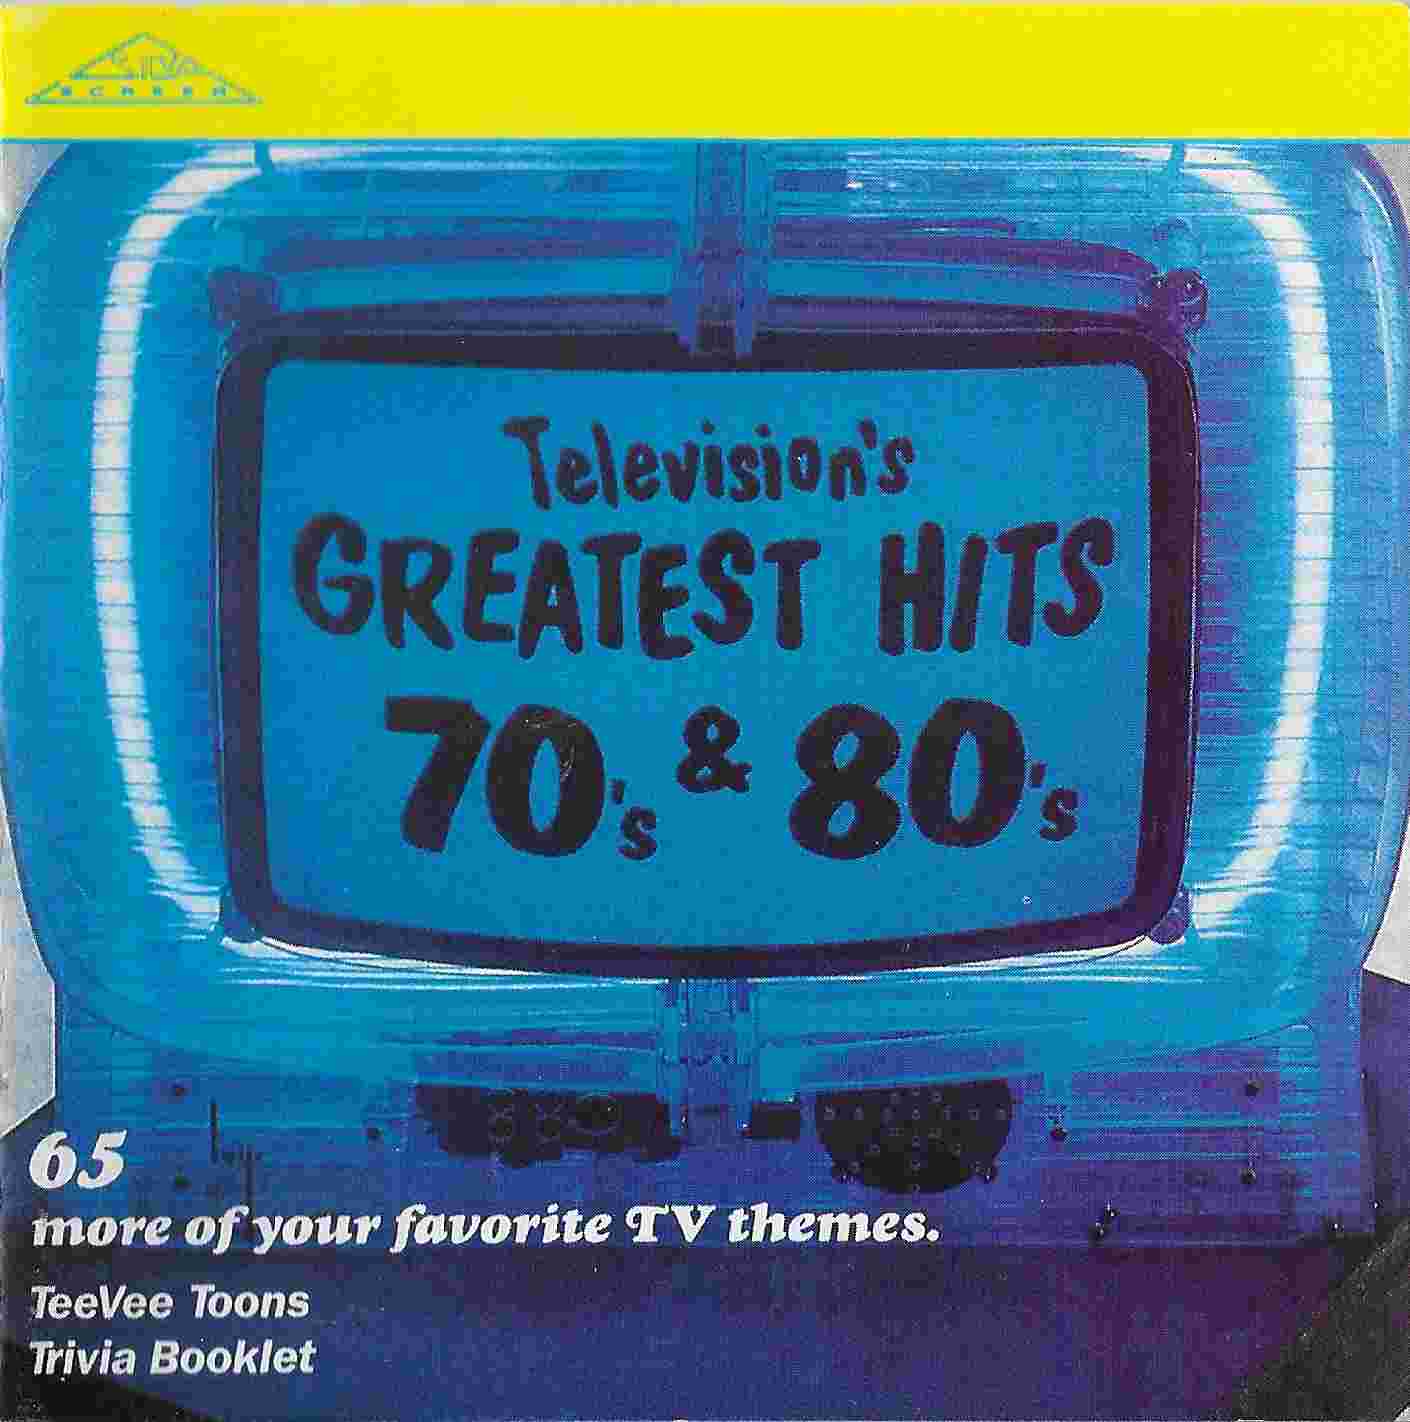 Picture of Television's greatest hits - Volume 3 by artist Various from ITV, Channel 4 and Channel 5 cds library